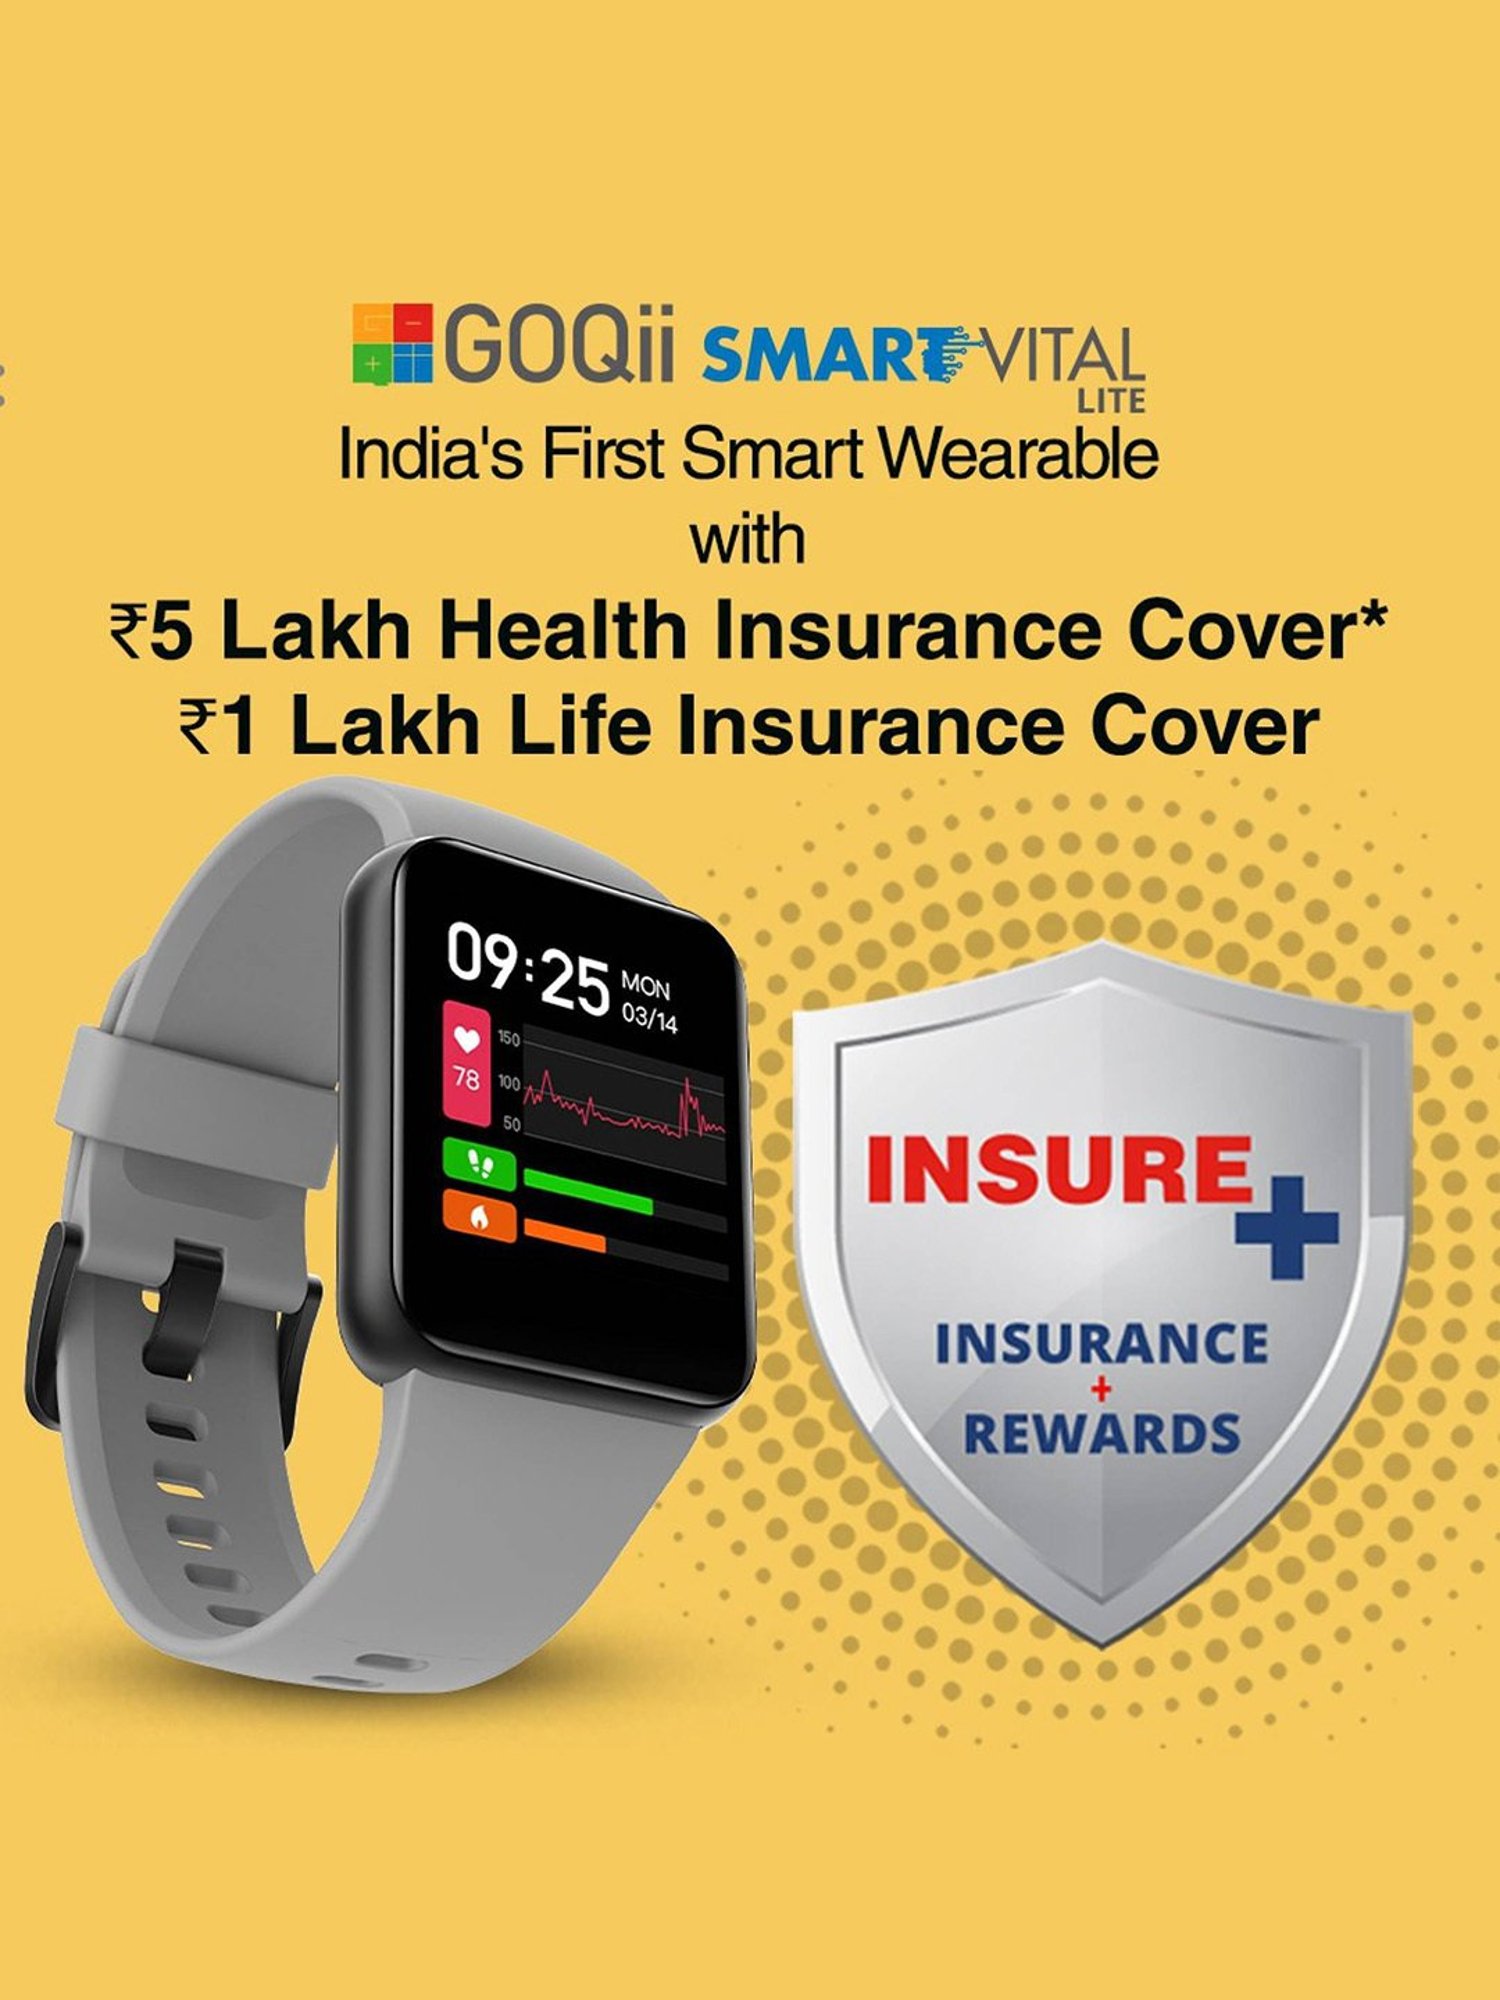 Planning to buy a Health Insurance? Watch out for these important factors!